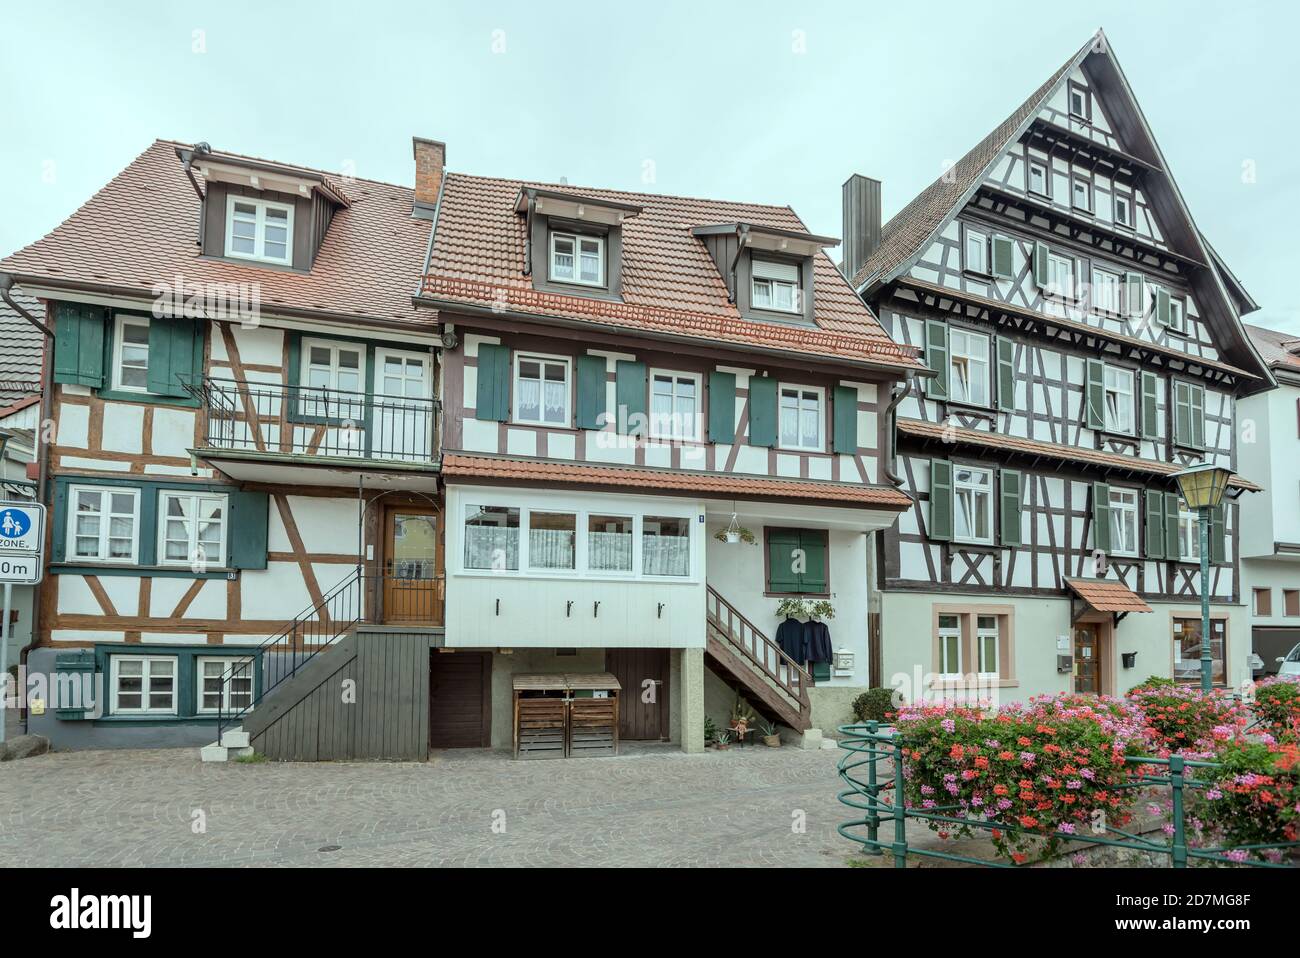 OBERKIRCH, GERMANY - September 06 2020: cityscape with picturesque old wattle houses at pedestrian precinct in historical little town, shot on septemb Stock Photo